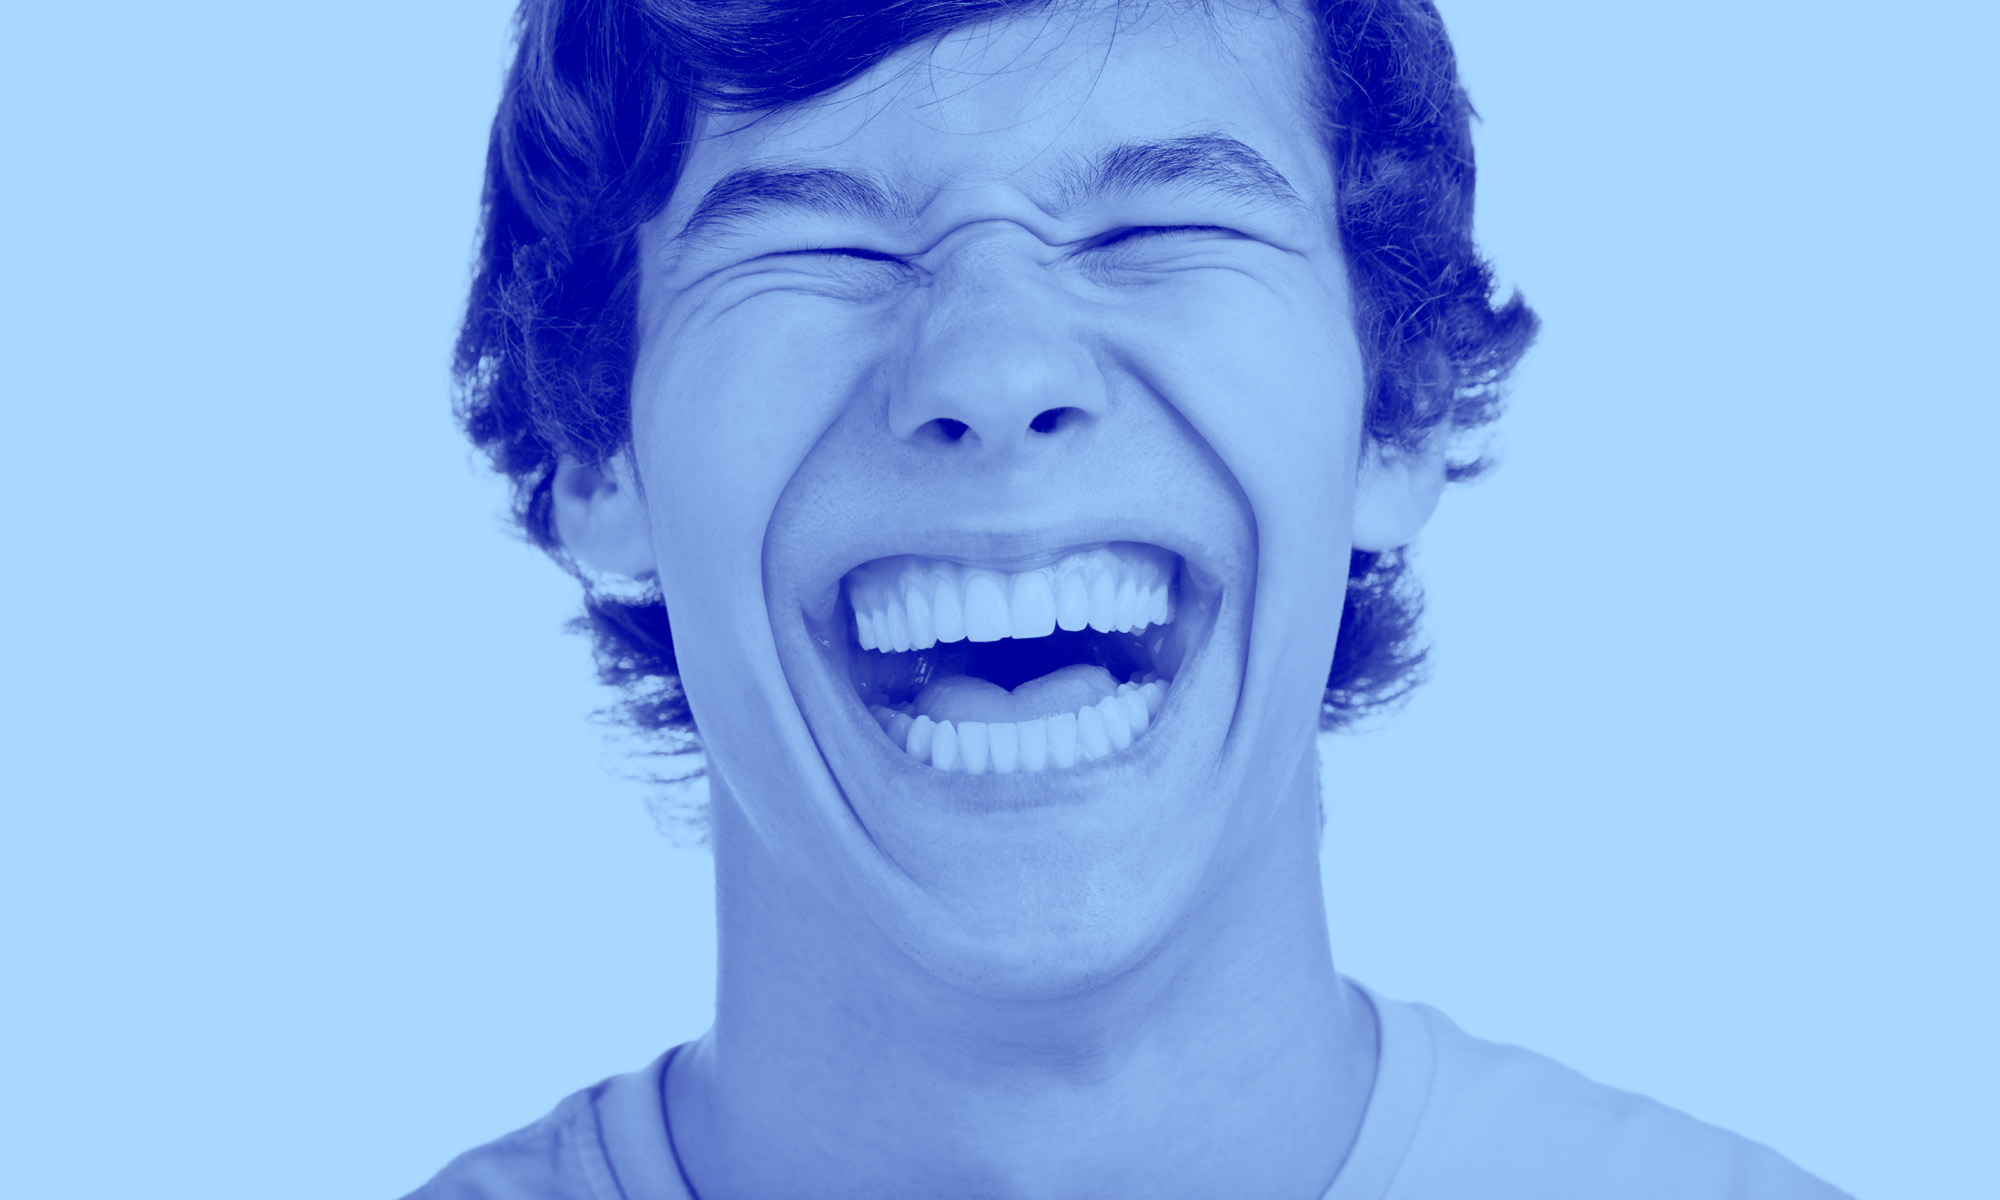 How scientists make people laugh to study humor |